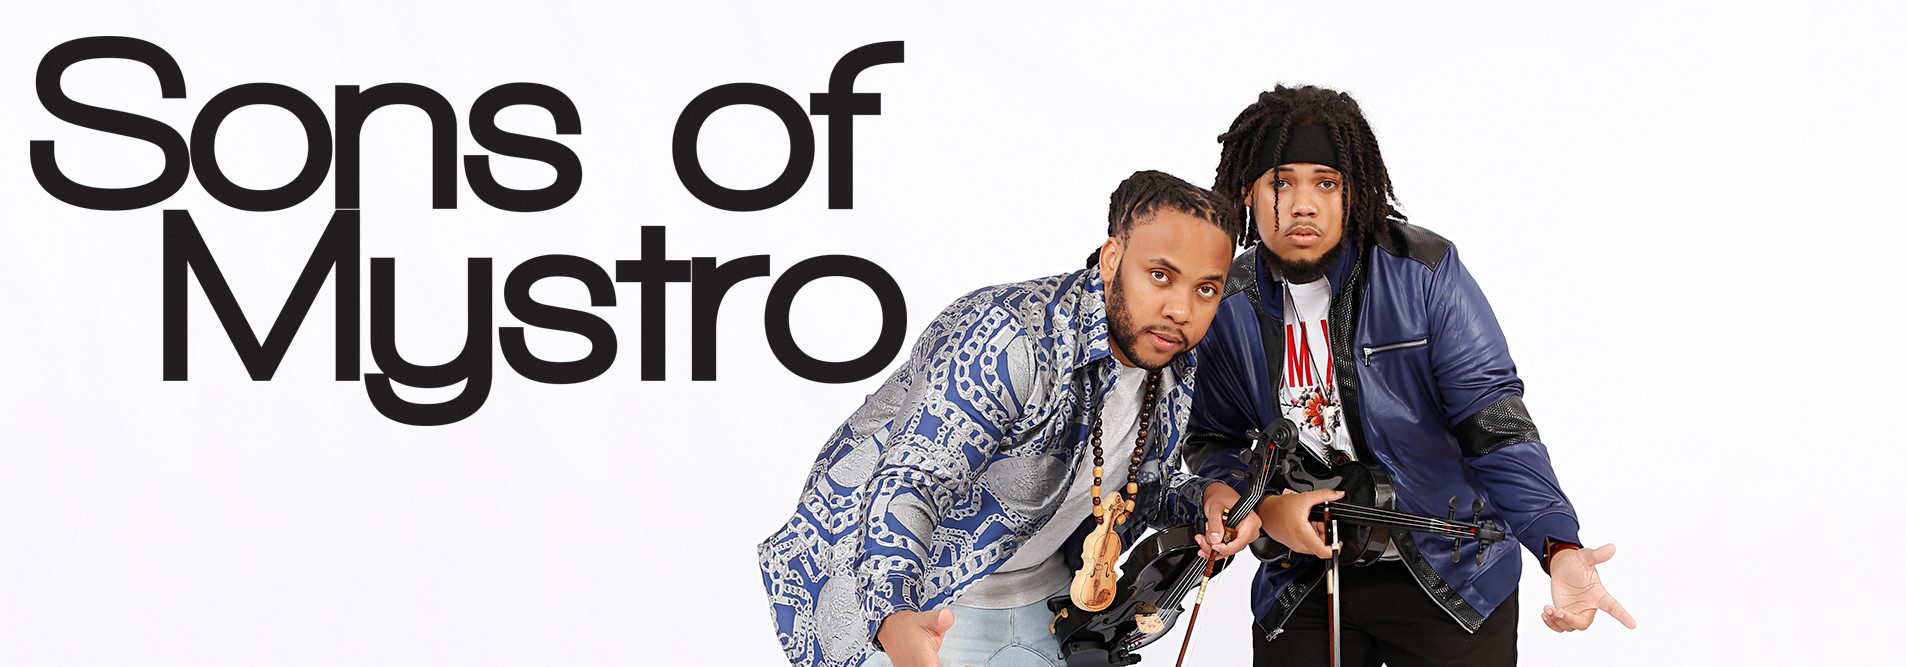 Sons of Mystro logo banner, showing the band name and the two siblings with their instruments.